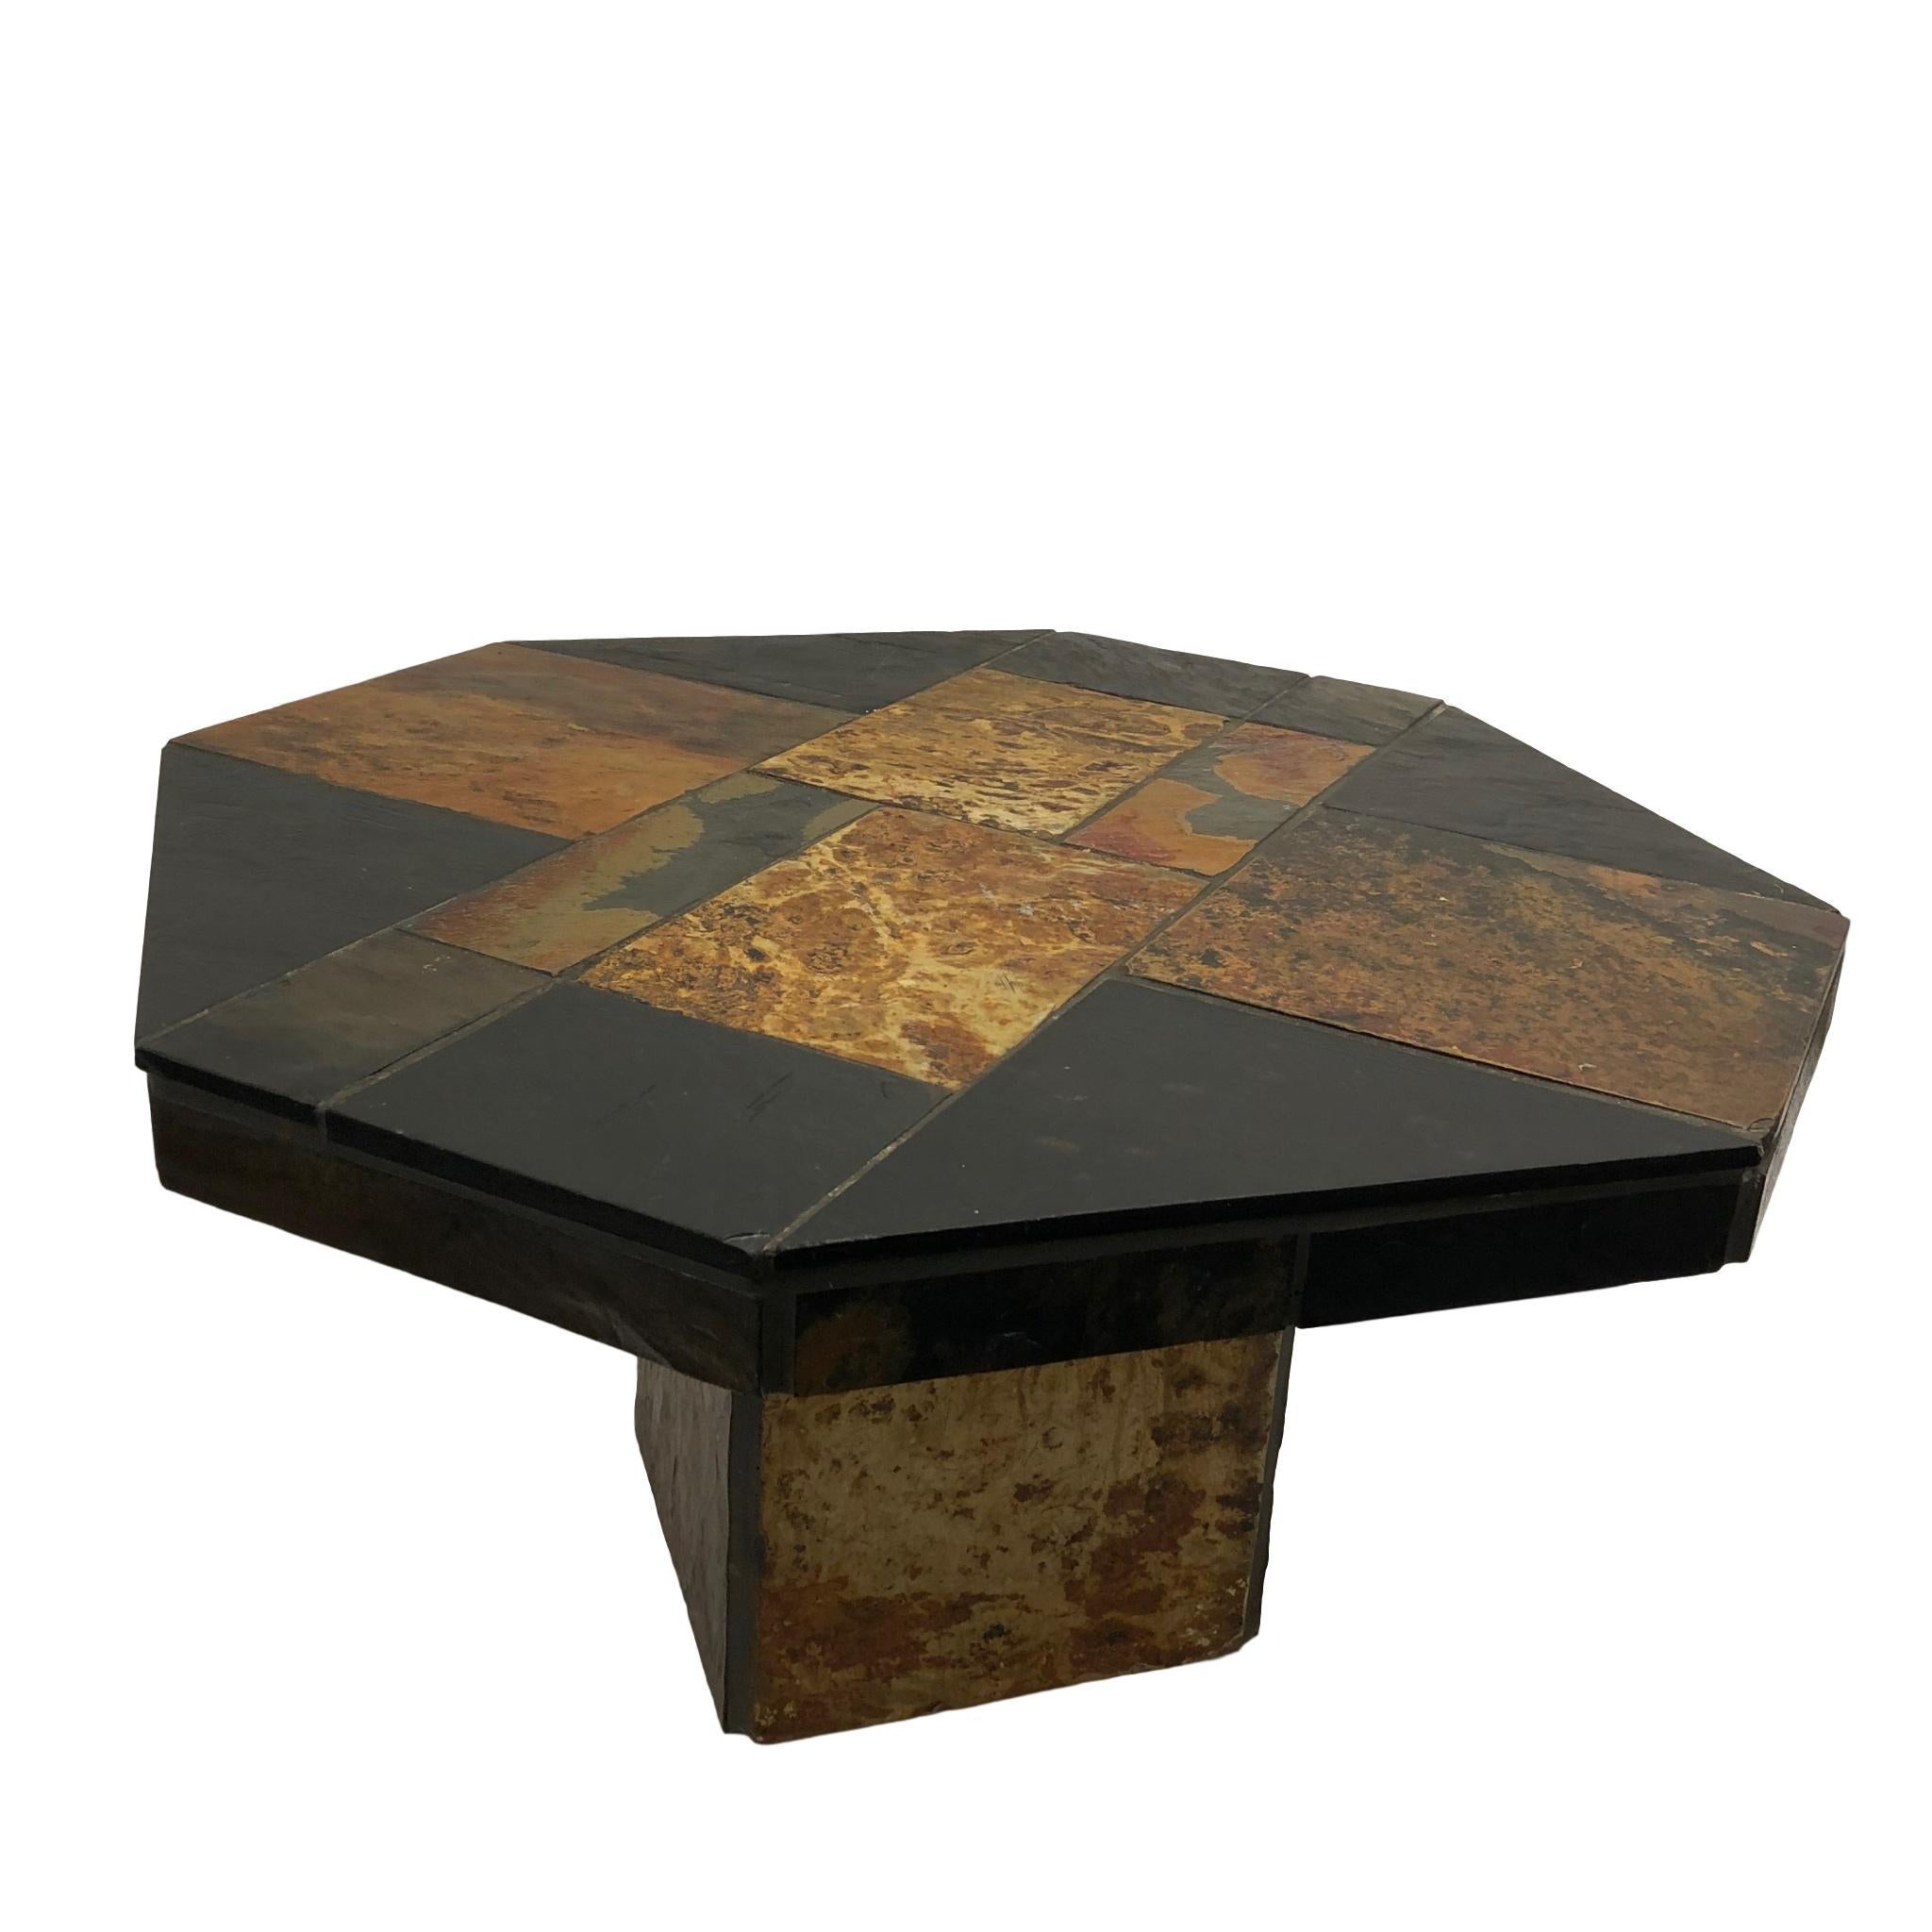 Offered is this beautiful rare Brutalist octagonal shaped slate coffee or cocktail table, made in the 1960s. A 